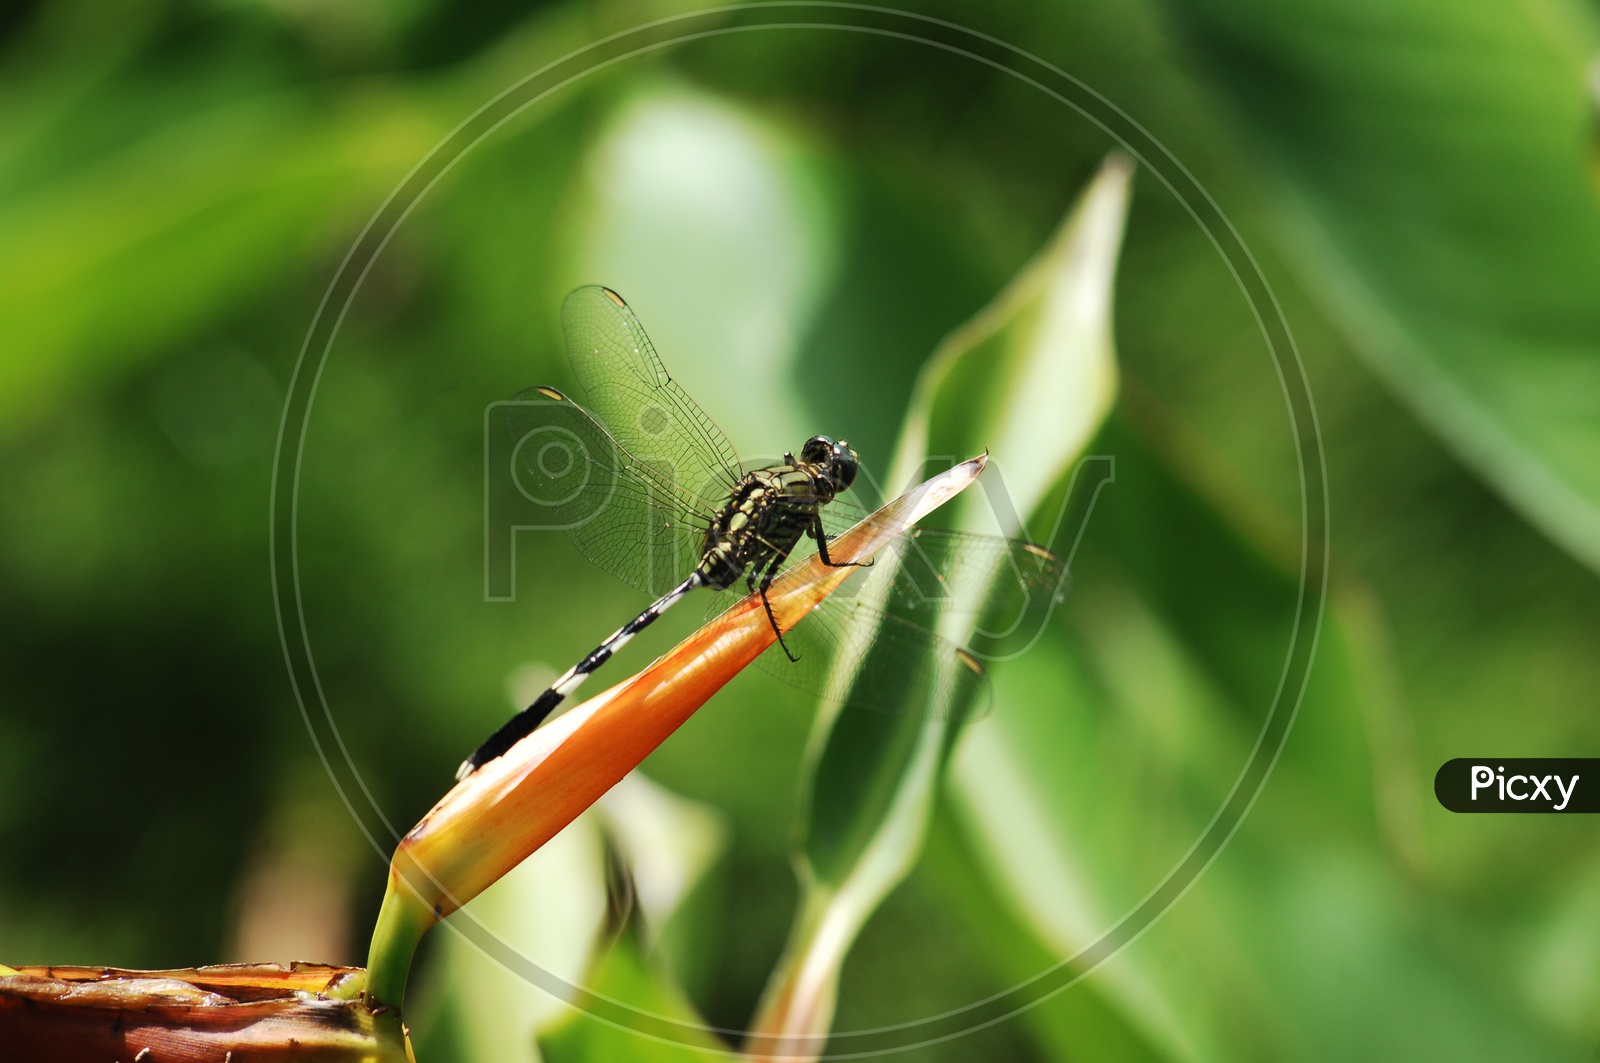 A Dragonfly on the leaf